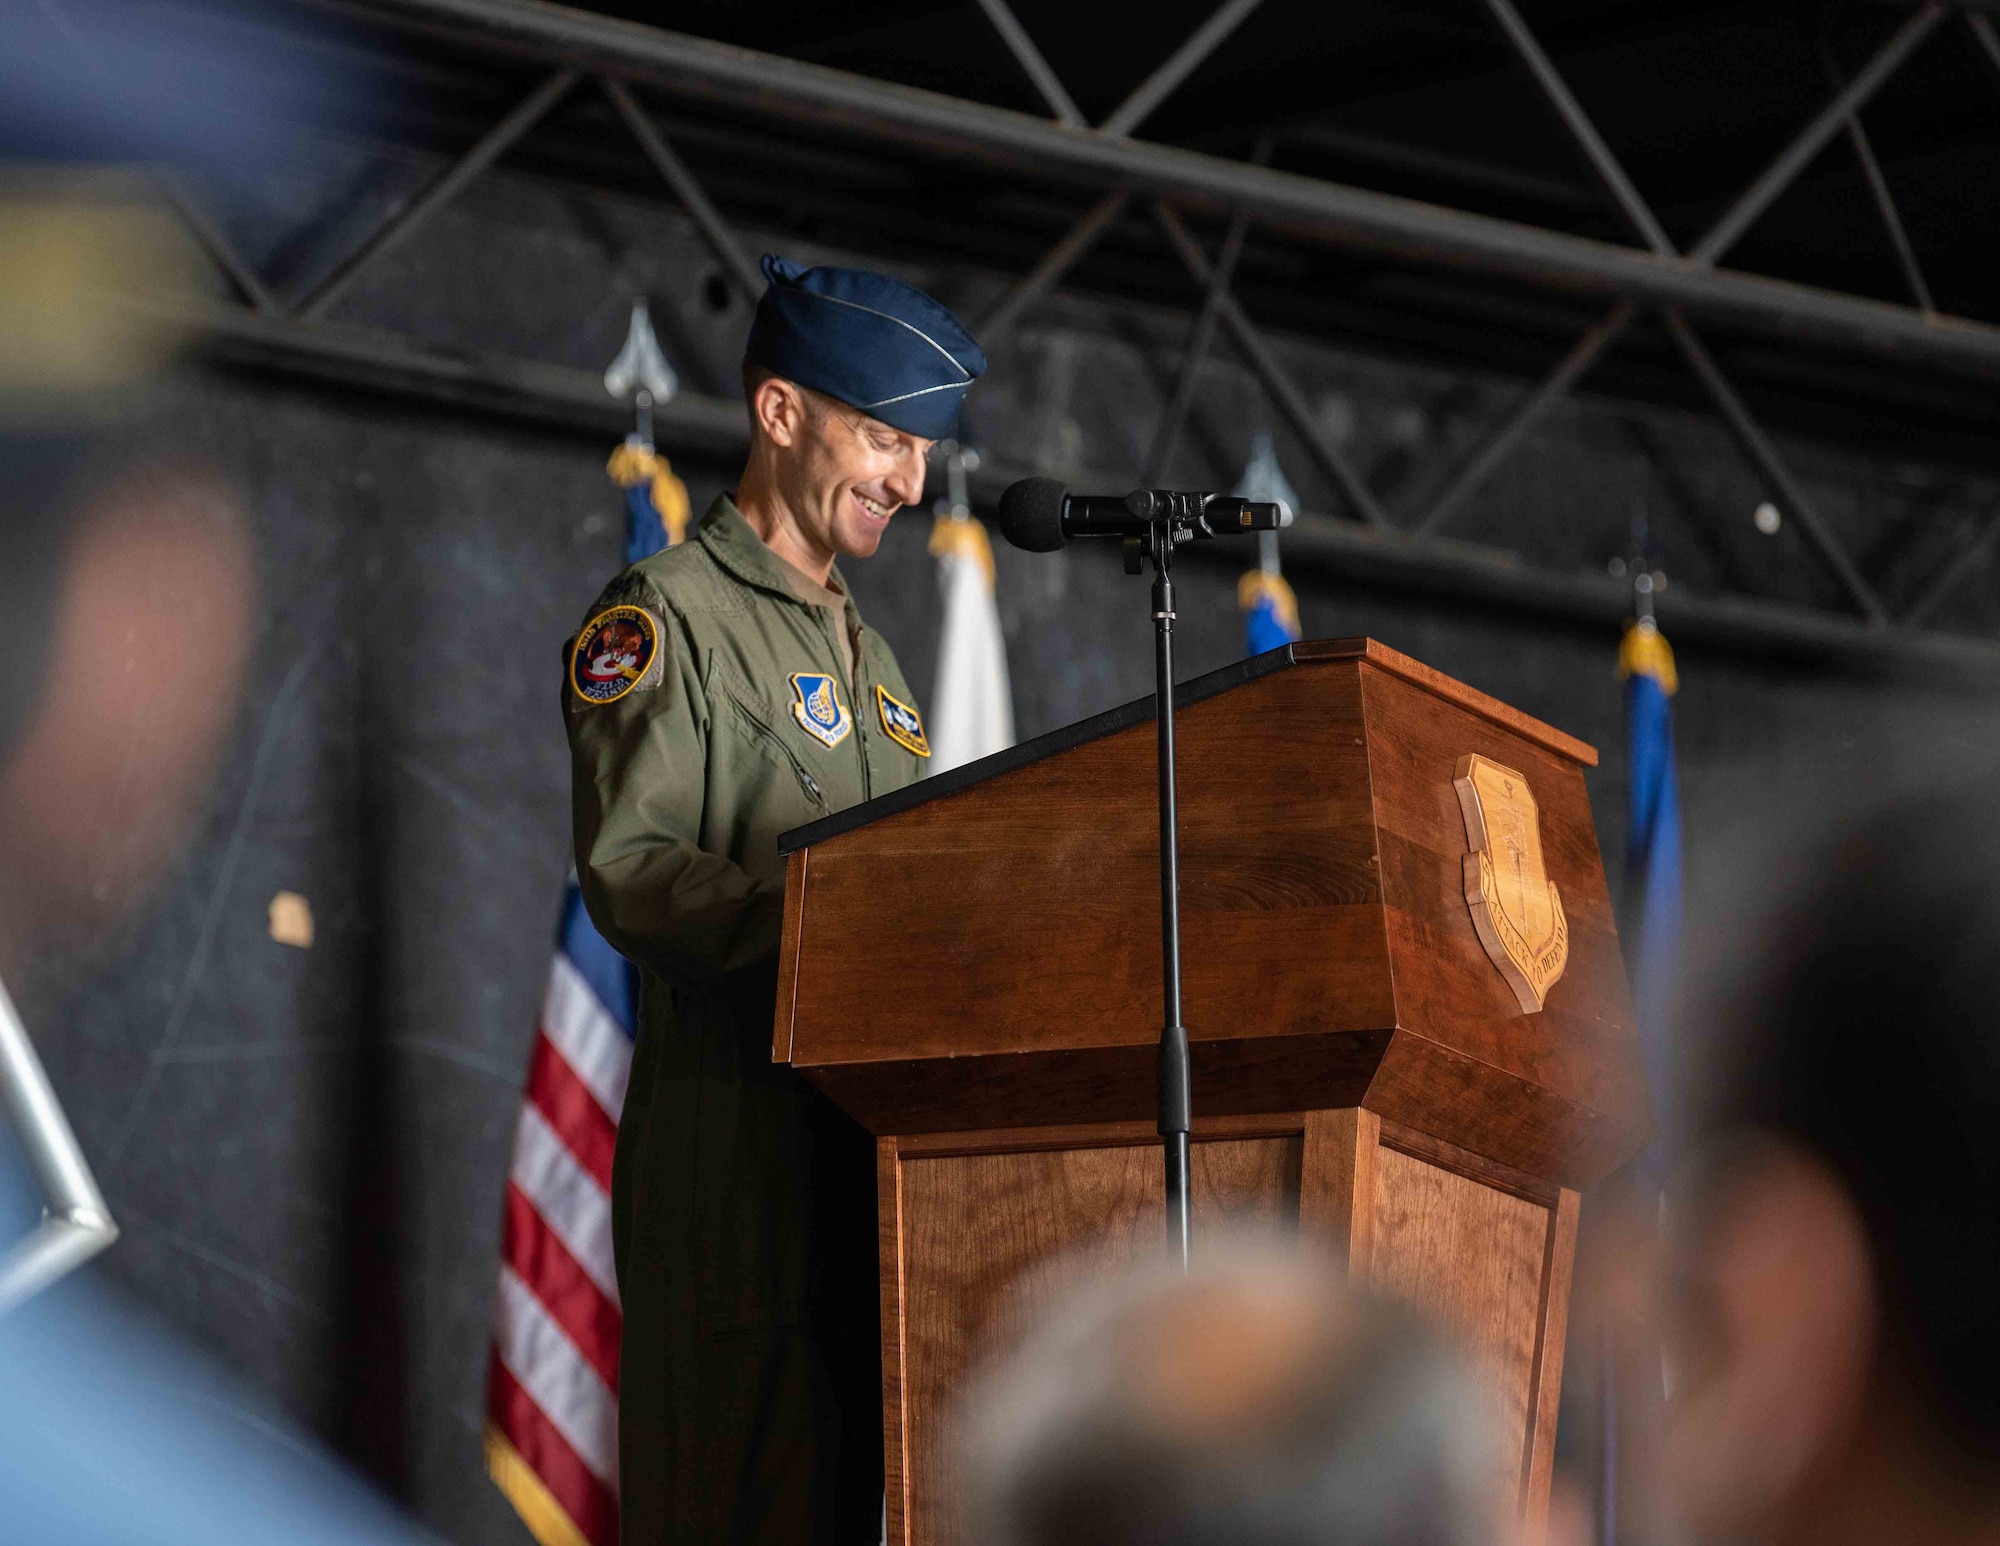 United States Air Force Col. Michael P. Richard, 35th Fighter Wing (FW) incoming commander, smiles as he delivers a speech during the 35th FW change of command ceremony at Misawa Air Base, Japan, June 30, 2022.